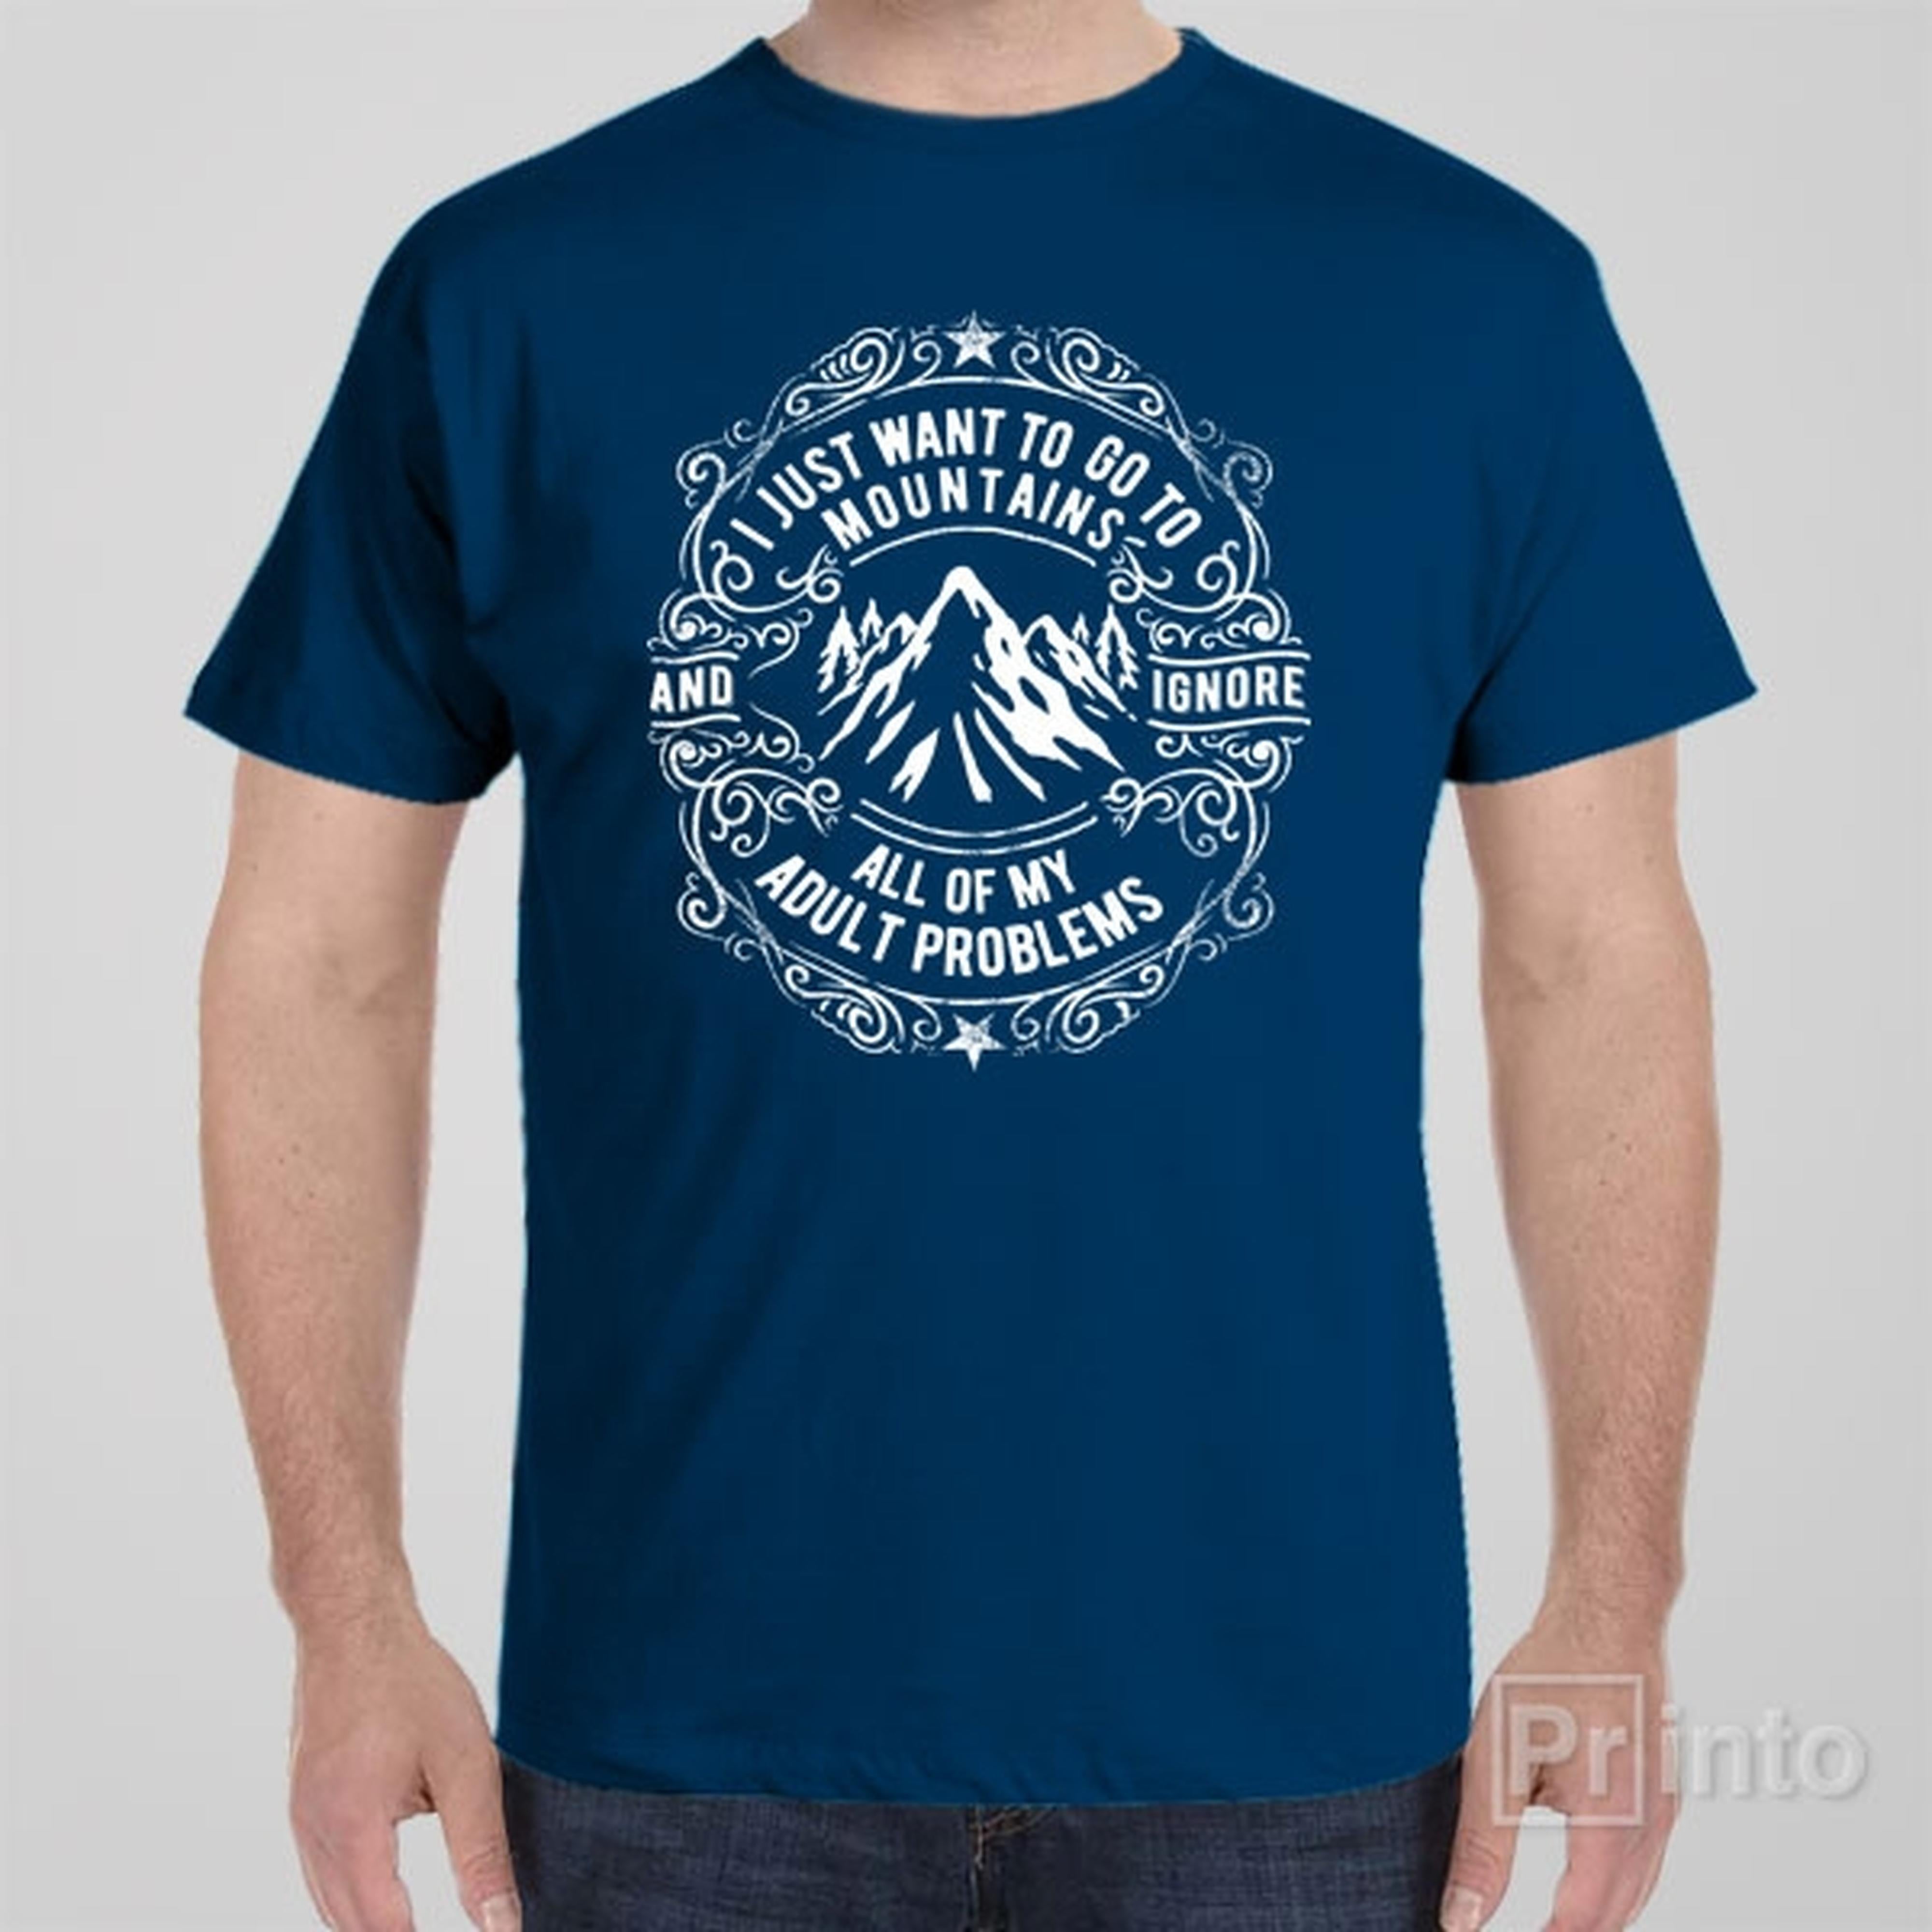 i-want-to-go-to-mountains-t-shirt